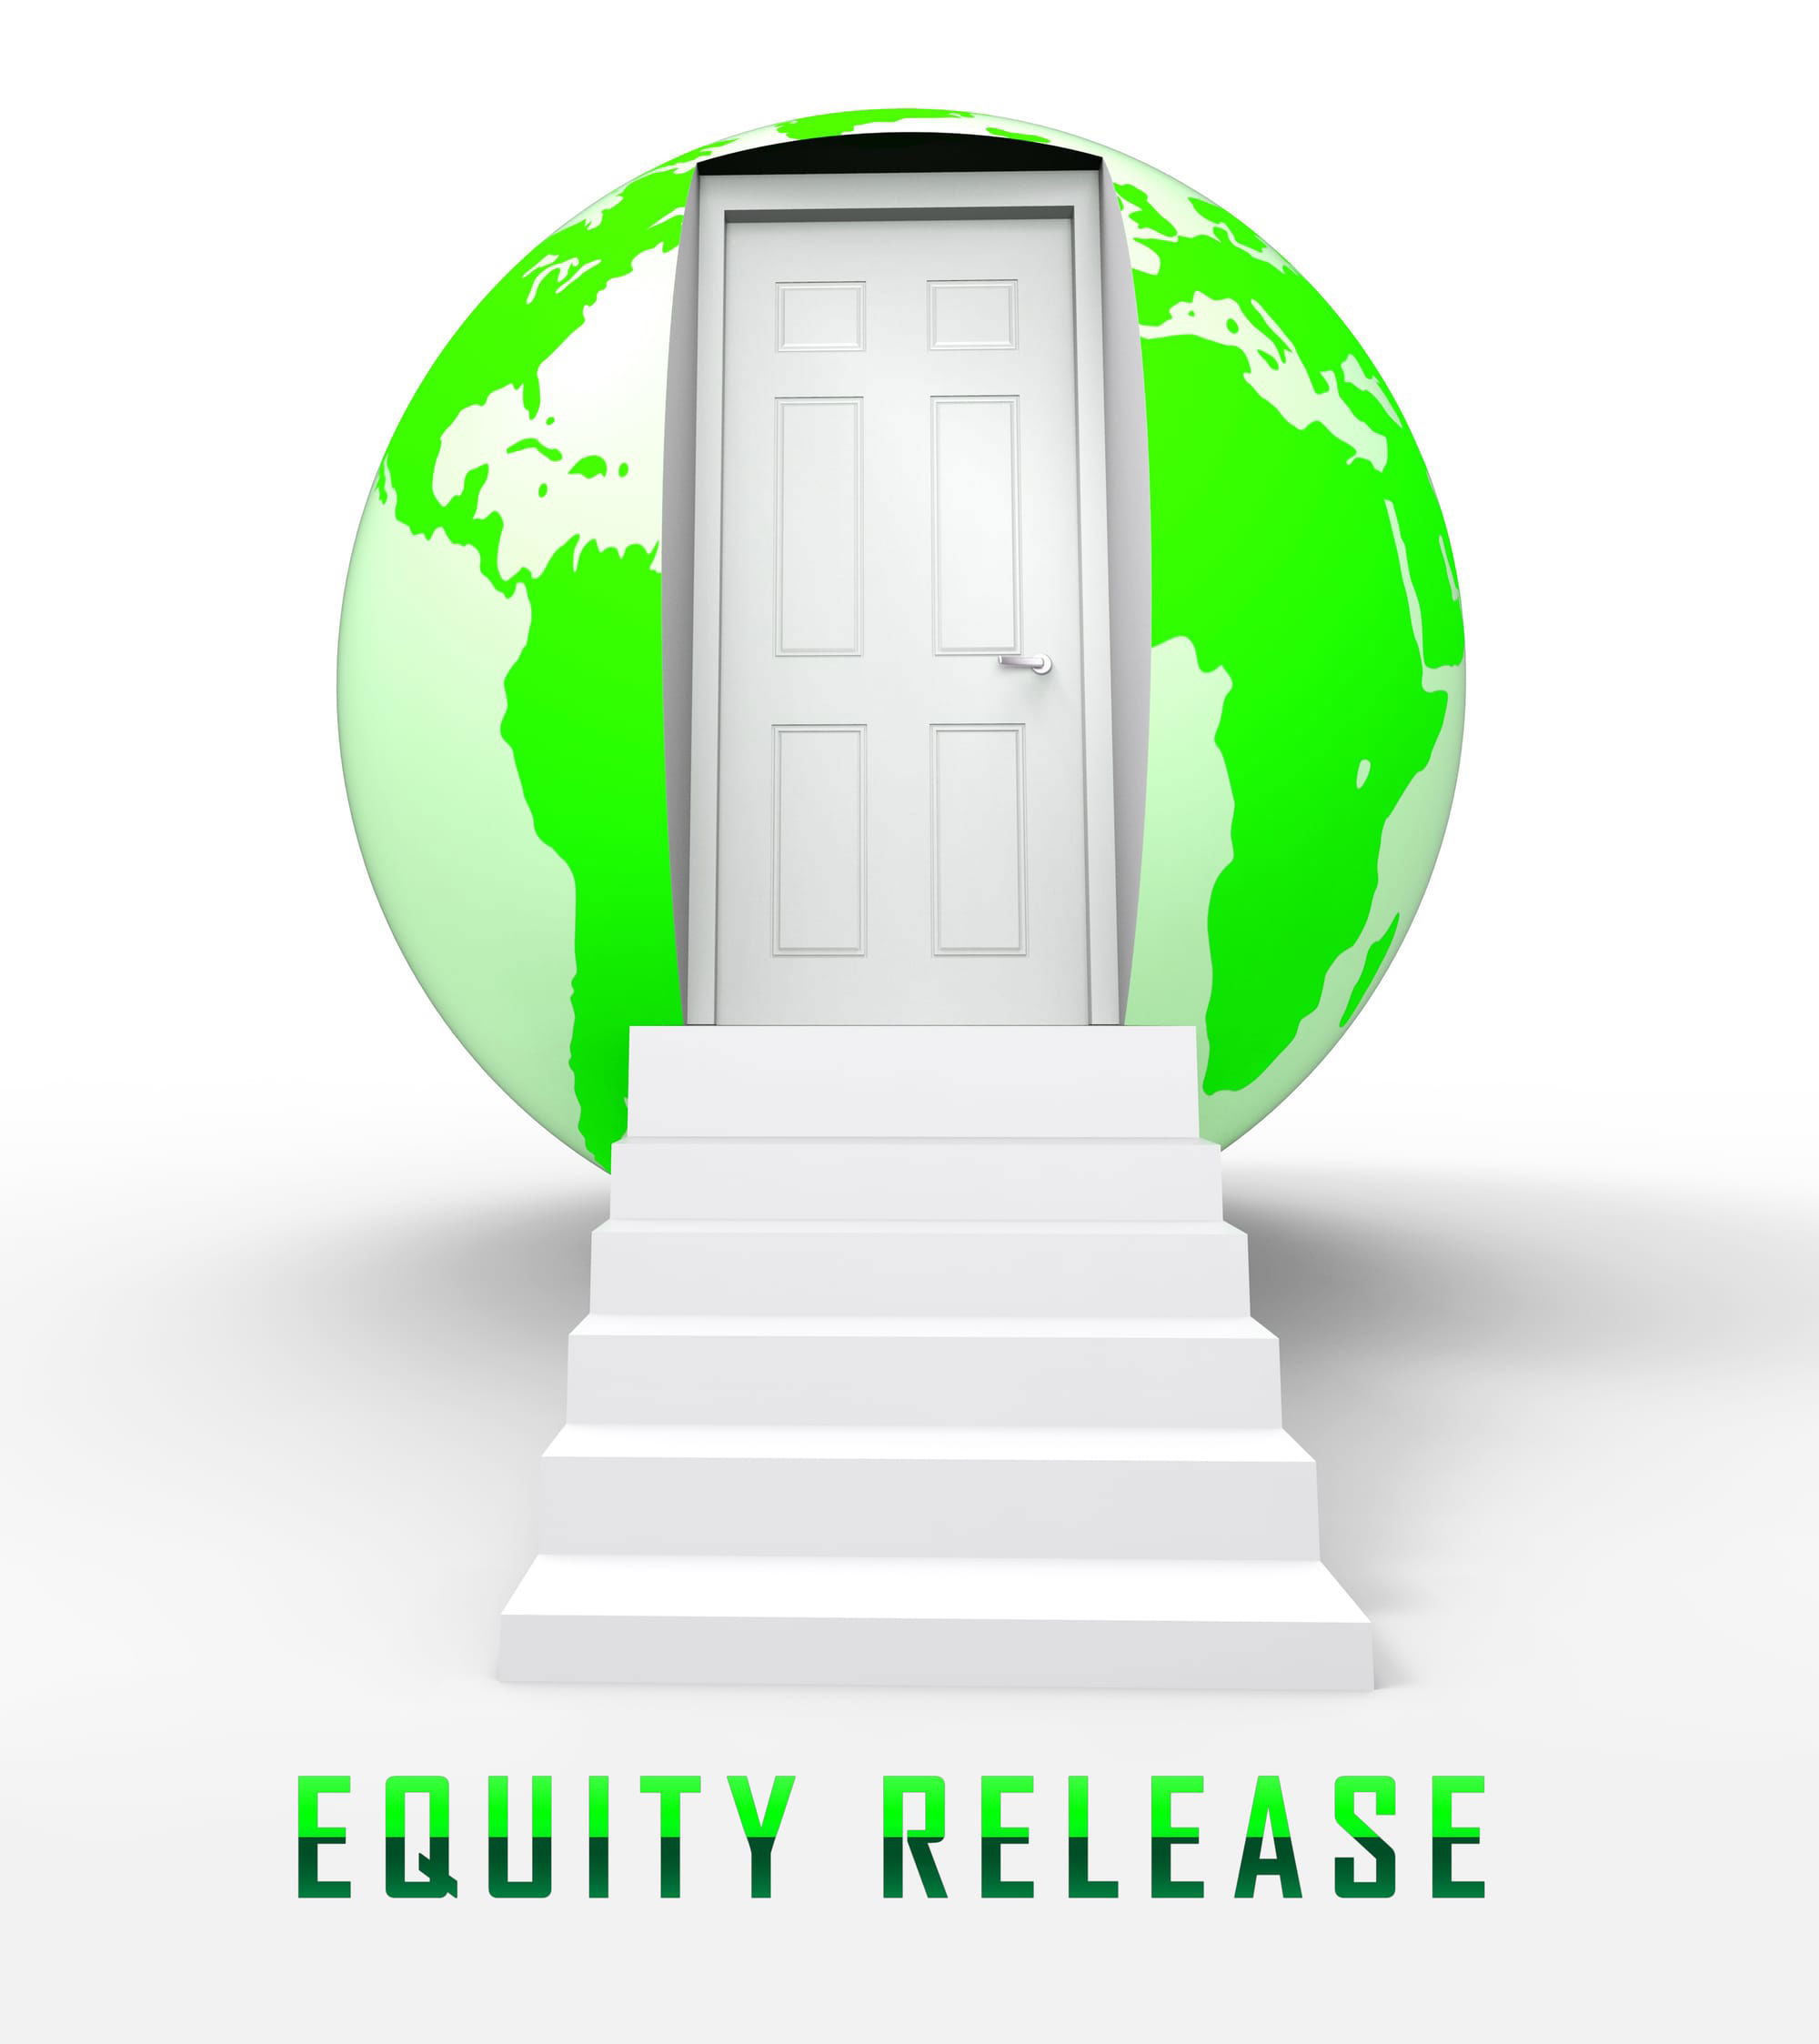 A Guide to Equity Release (April 2020)